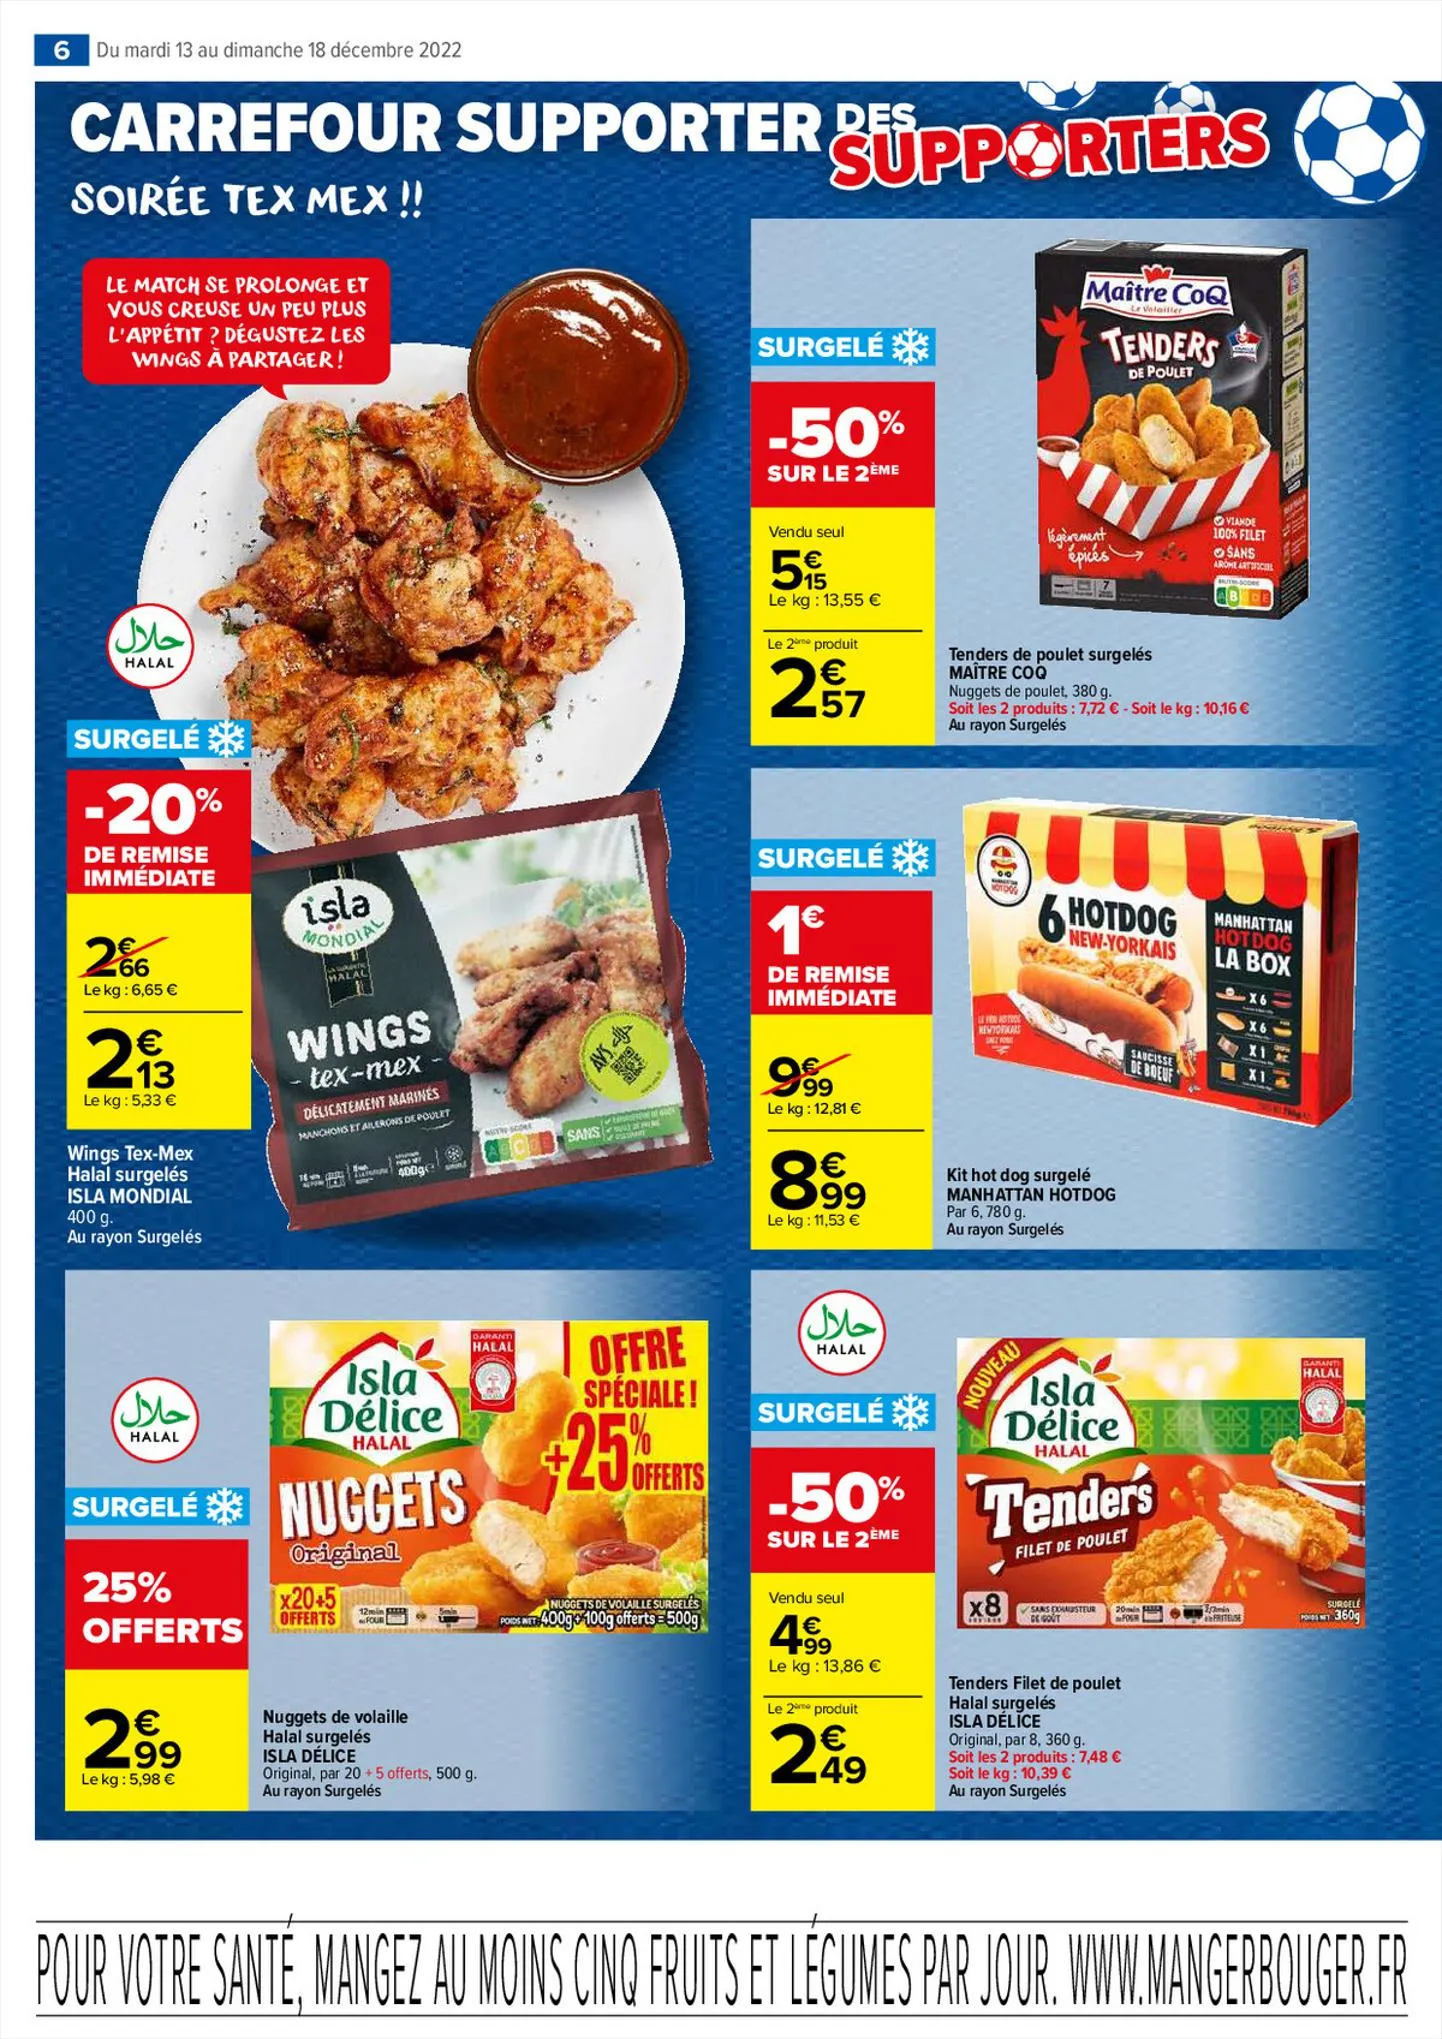 Catalogue Carrefour Supporter des Supporters, page 00006